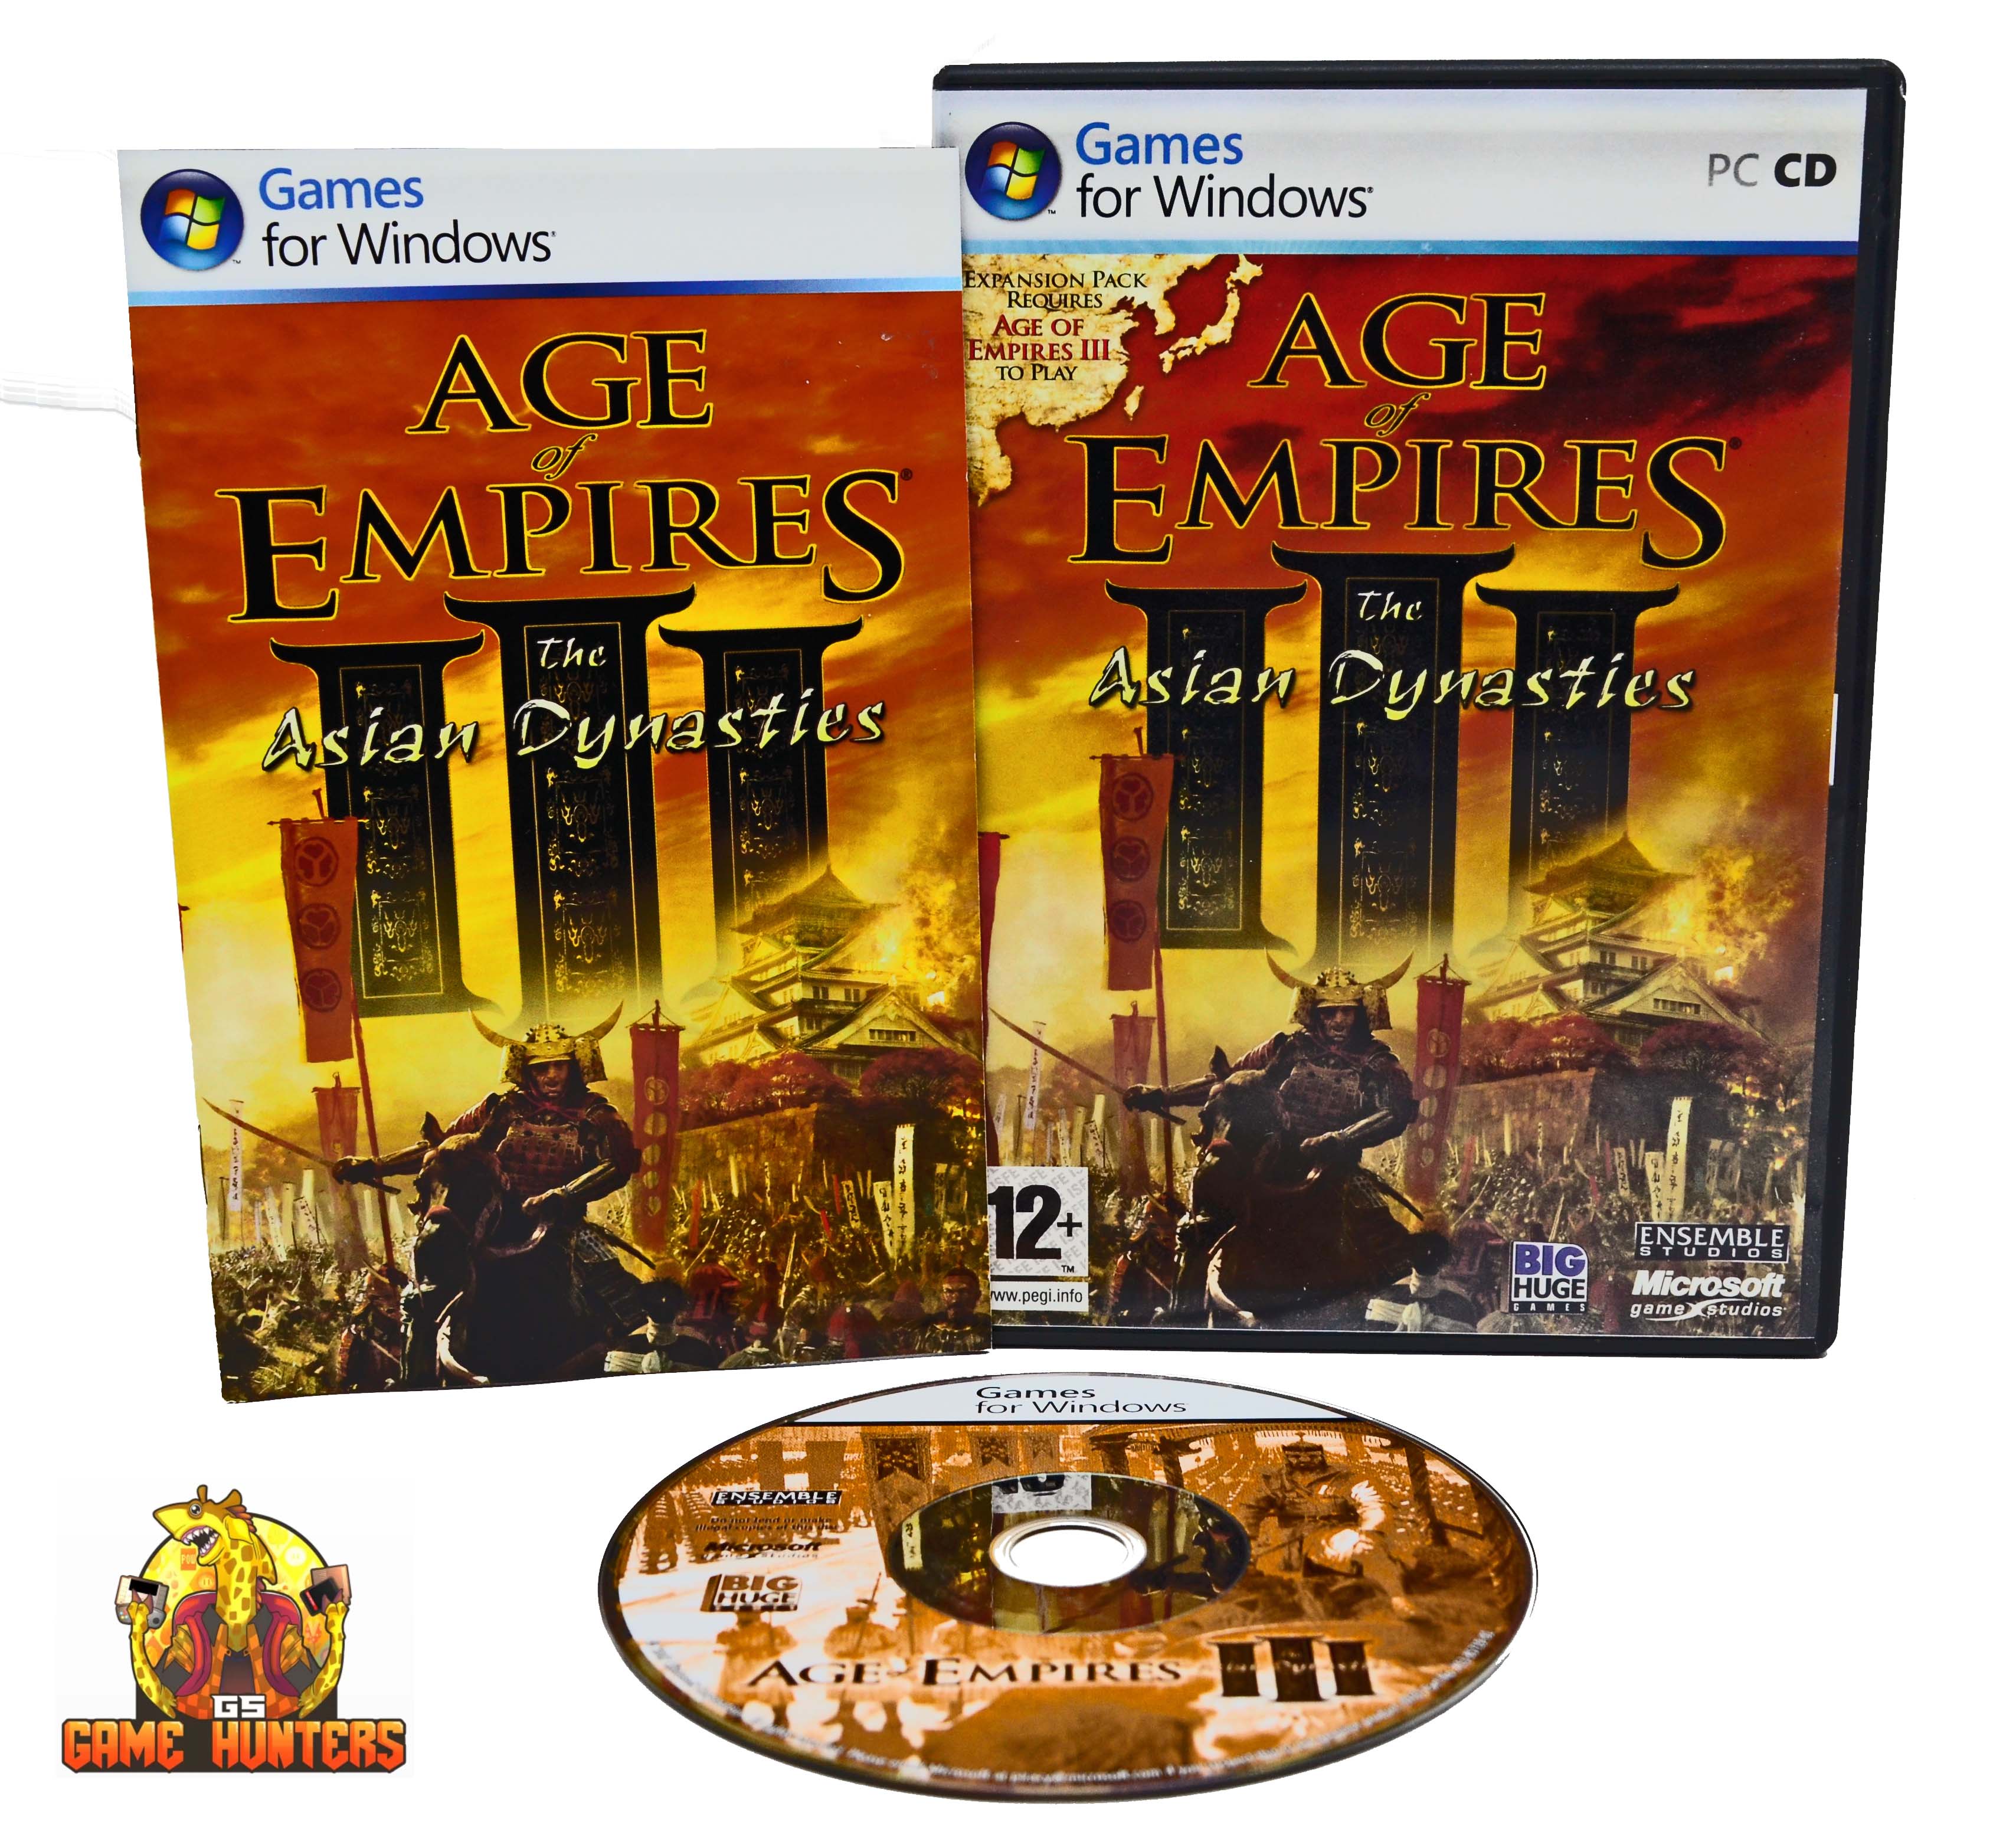 Age of Empires III The Asian Dynasties Case, Manual & Disc.jpg  by GSGAMEHUNTERS